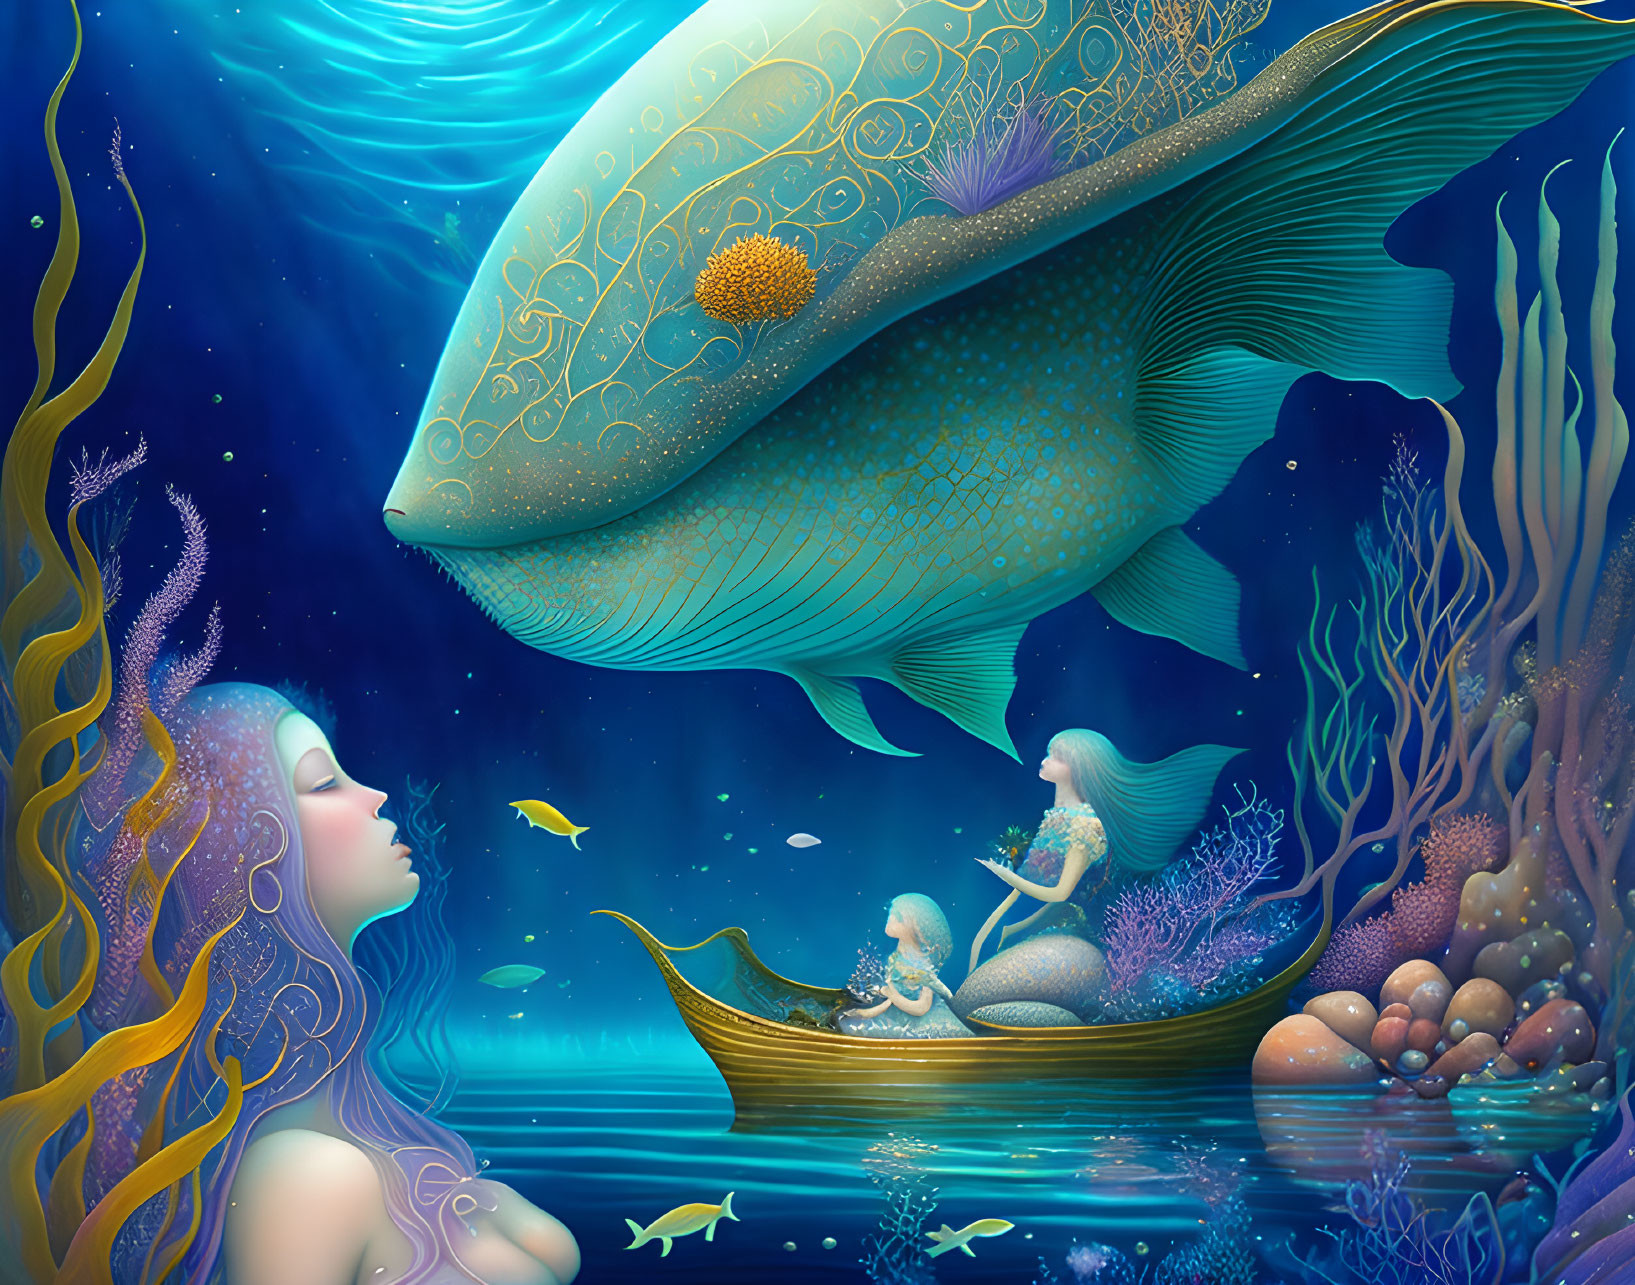 Vibrant underwater scene with giant fish, mermaid, girl in boat, and marine life